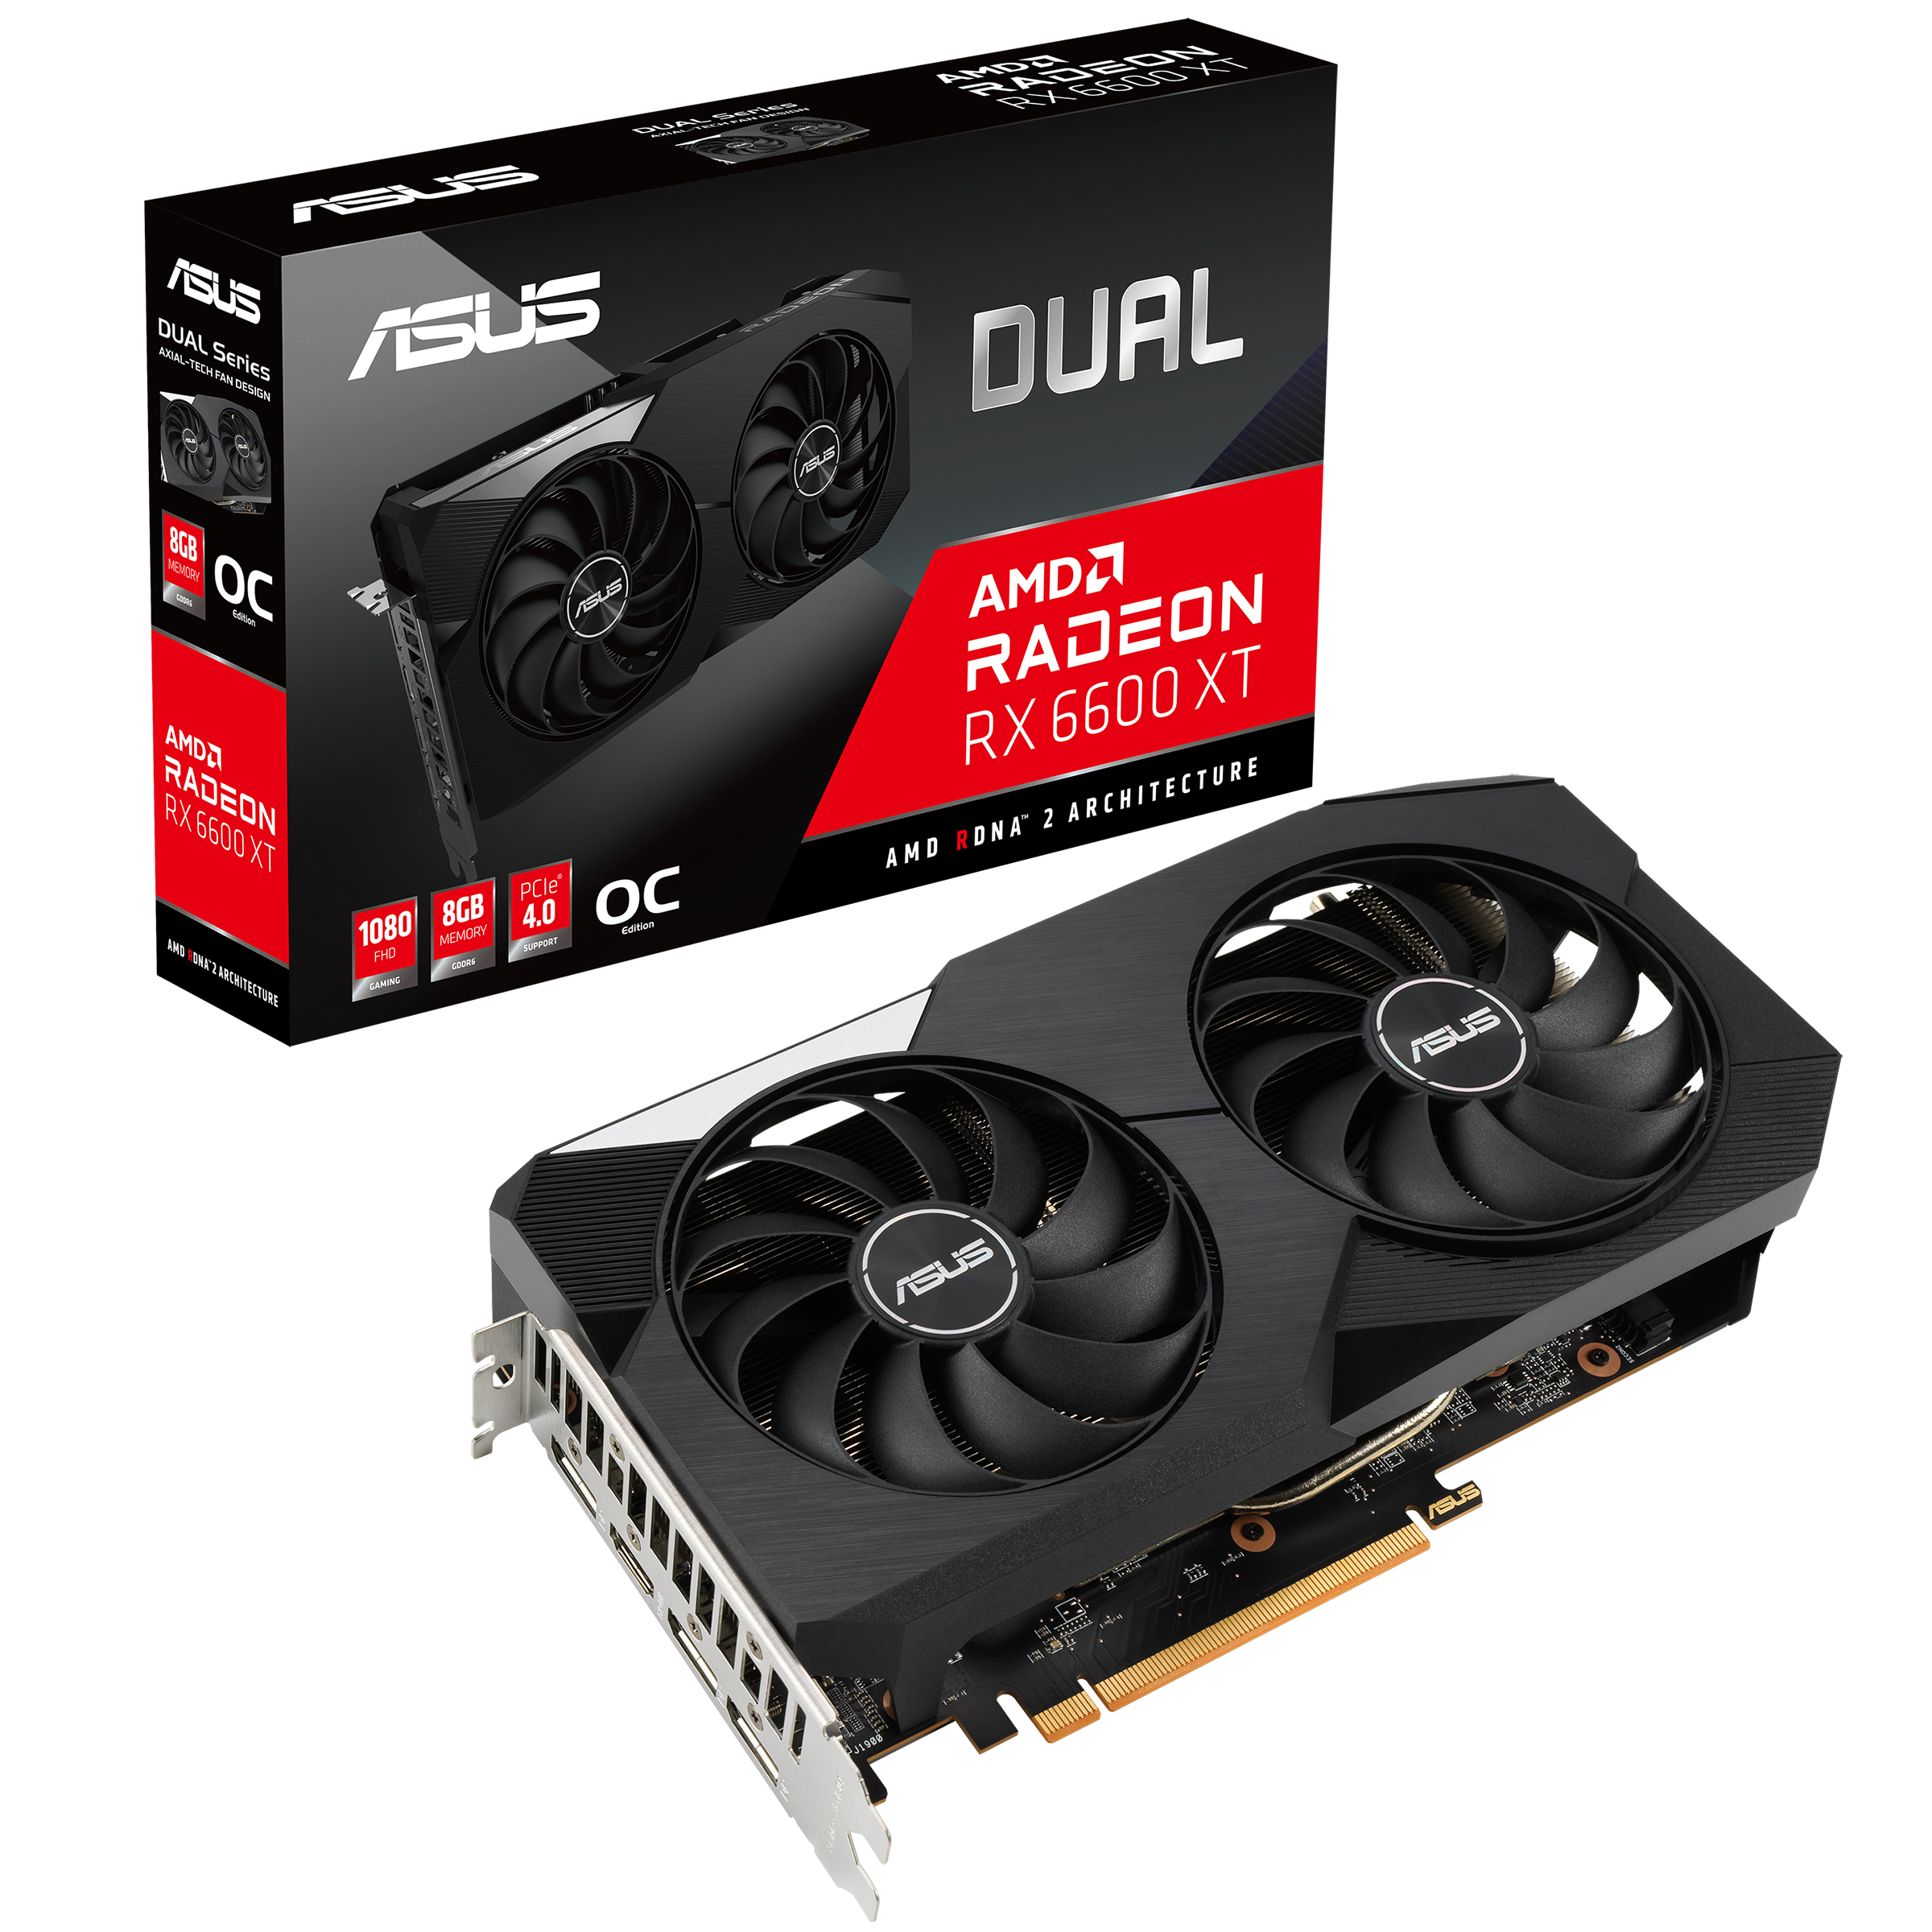 DUAL-RX6600XT-O8G｜Graphics Cards｜ASUS Global